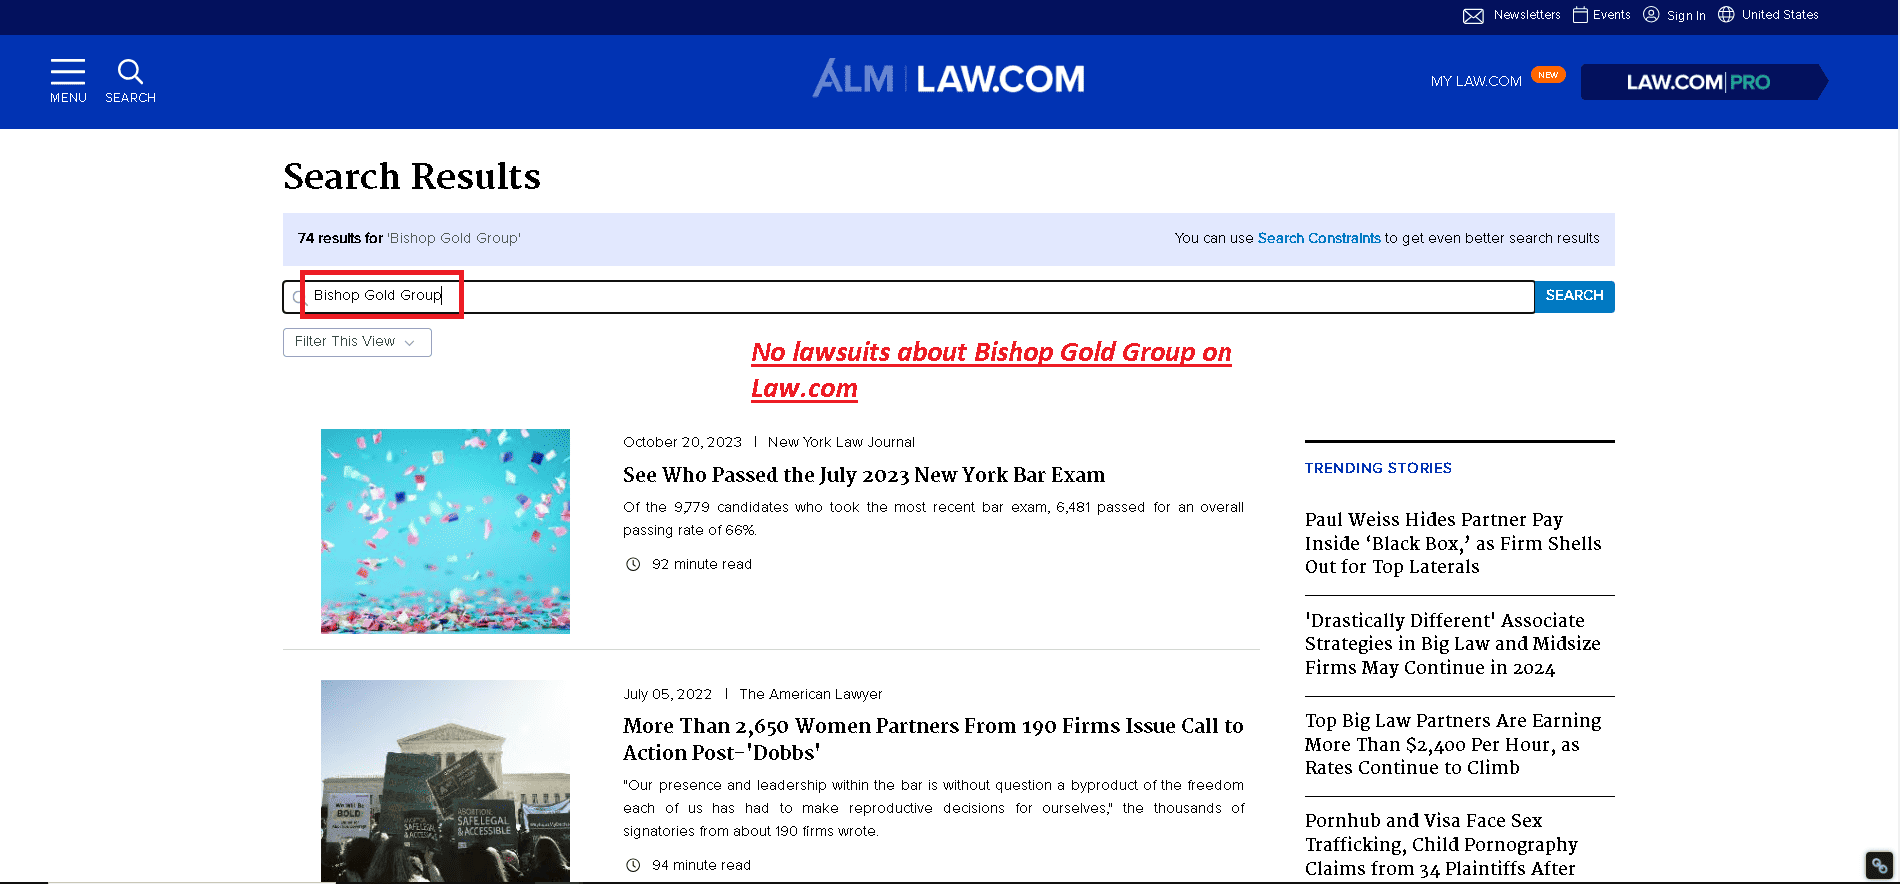 No lawsuits about Bishop Gold Group on Law.com